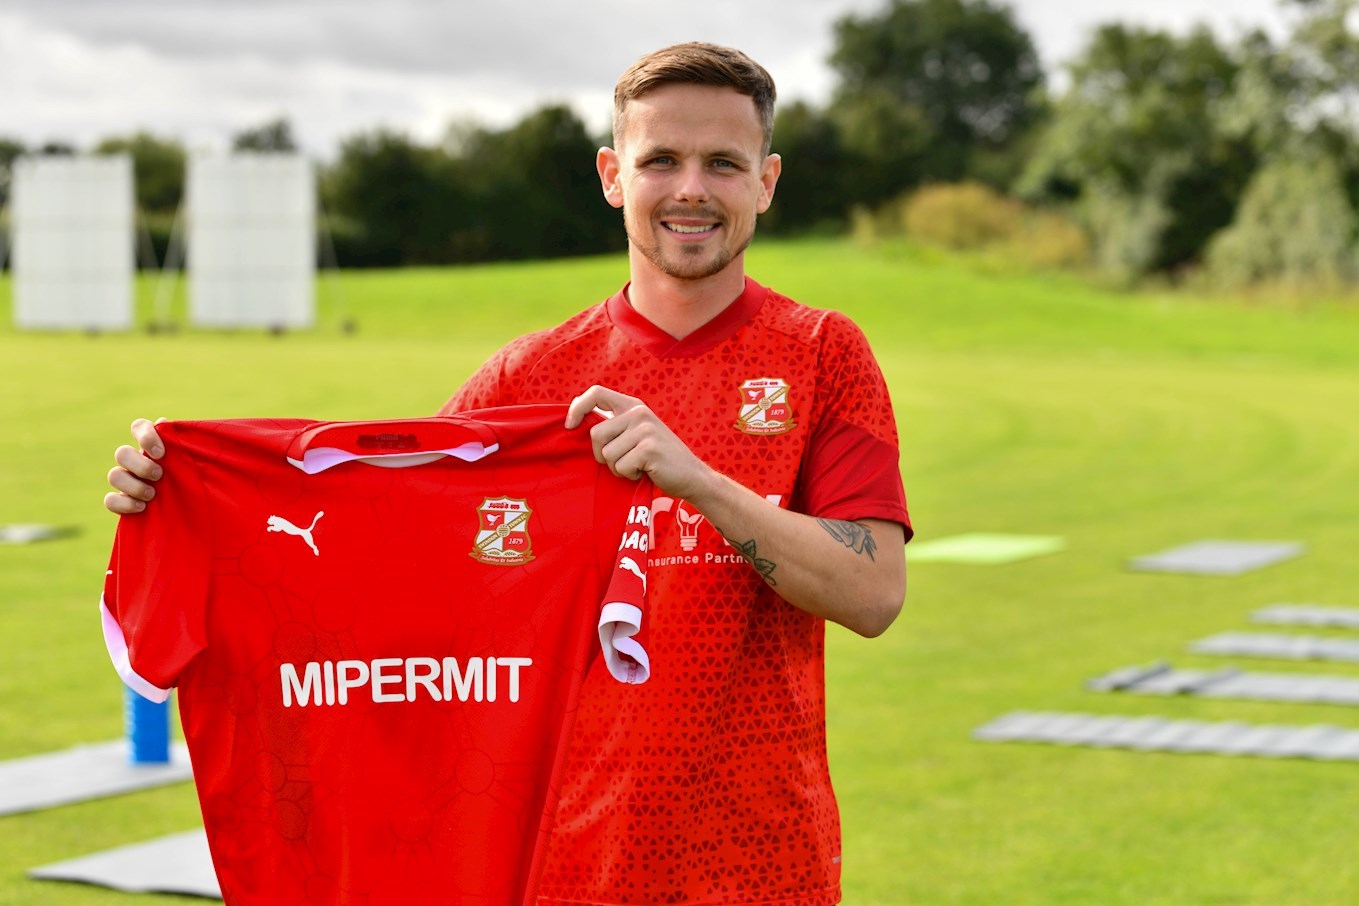 Swindon Town confirm their first permanent signing of the summer